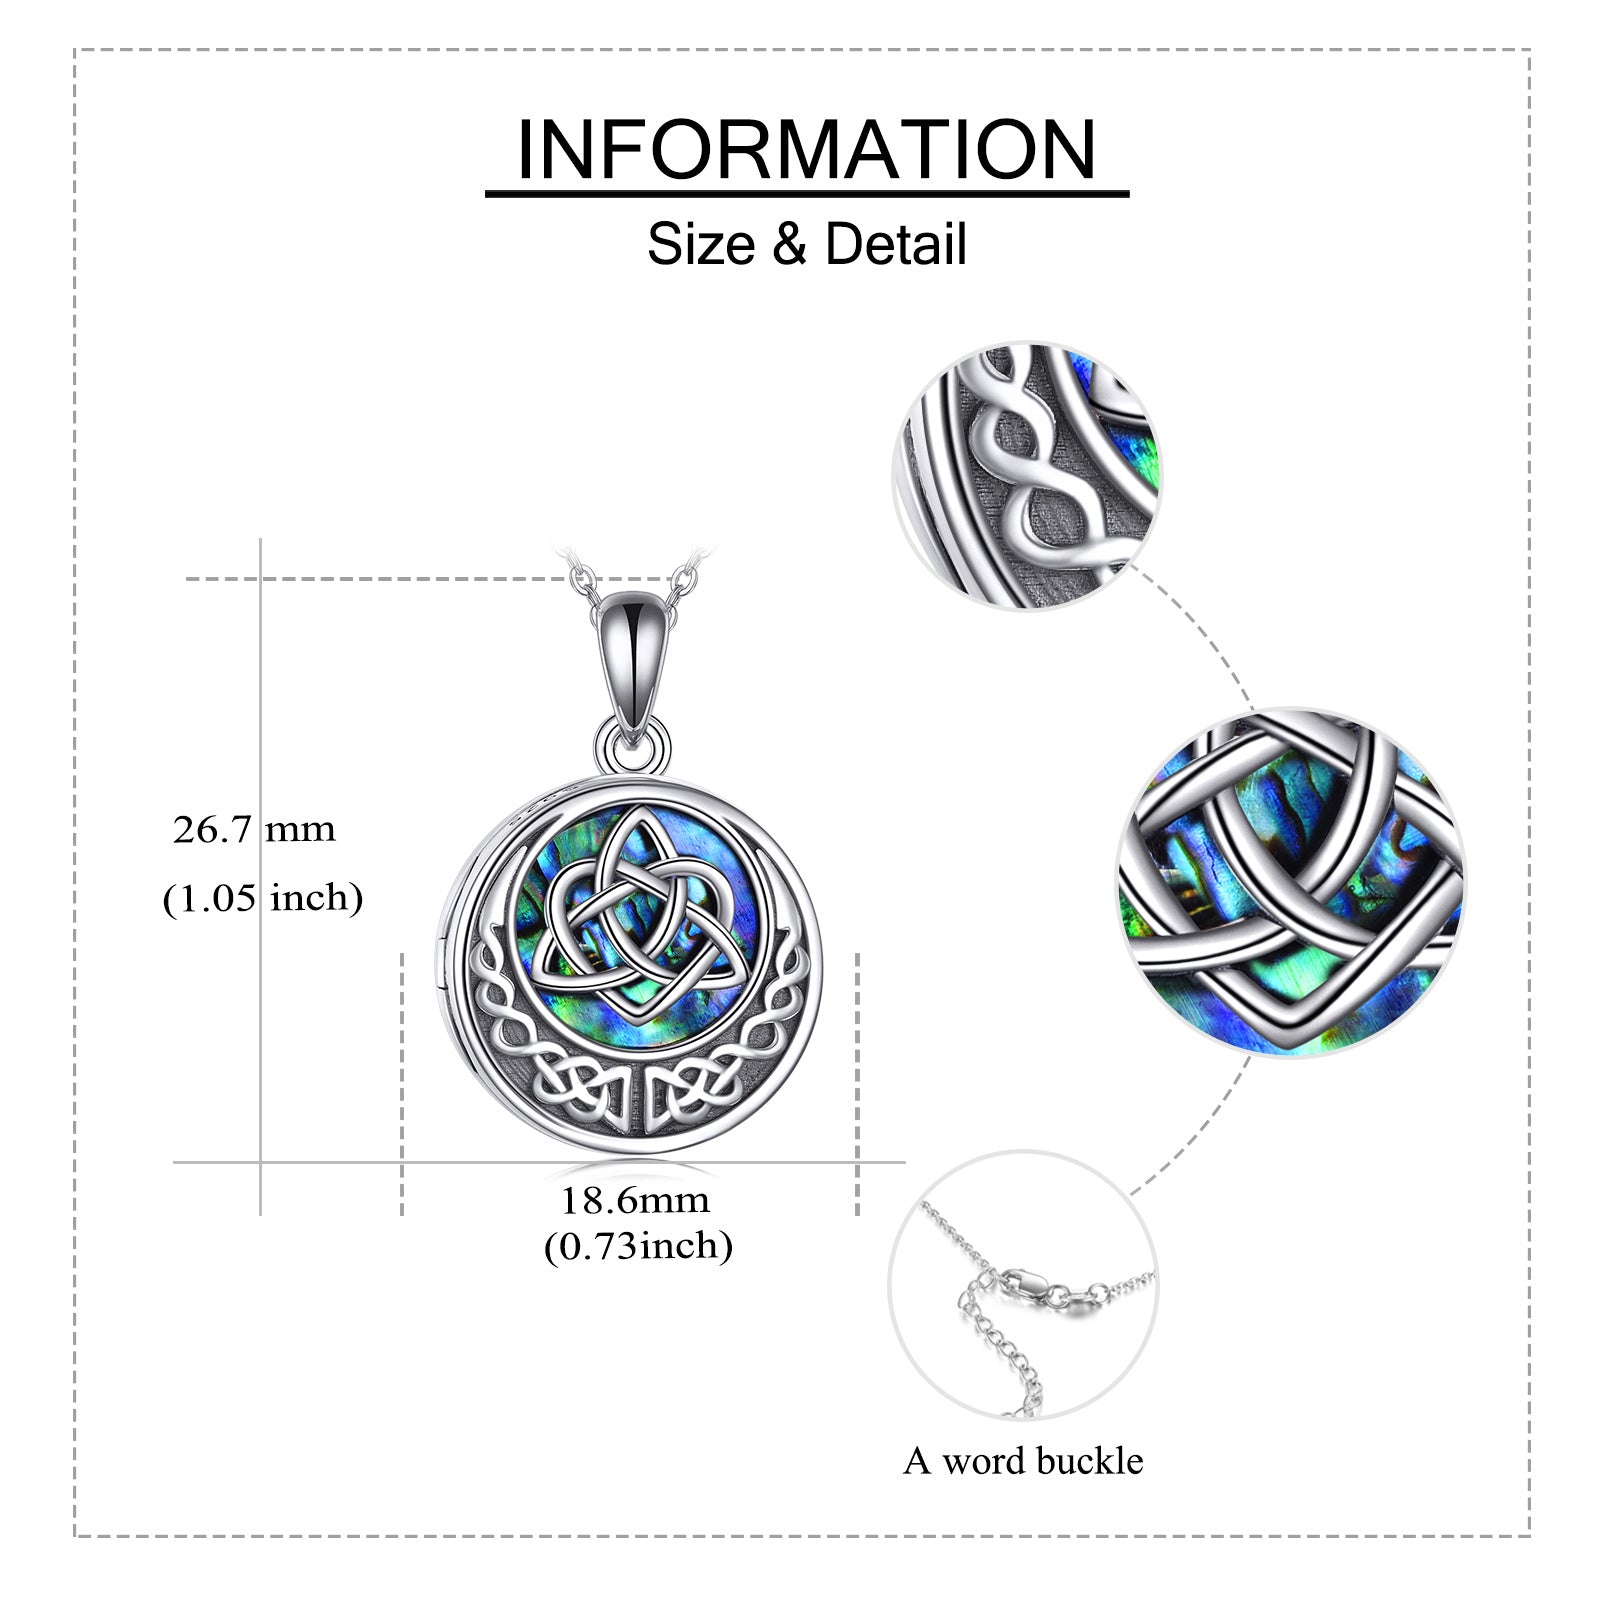 925 Silver Celtic Knot Photo Locket Necklace for Women